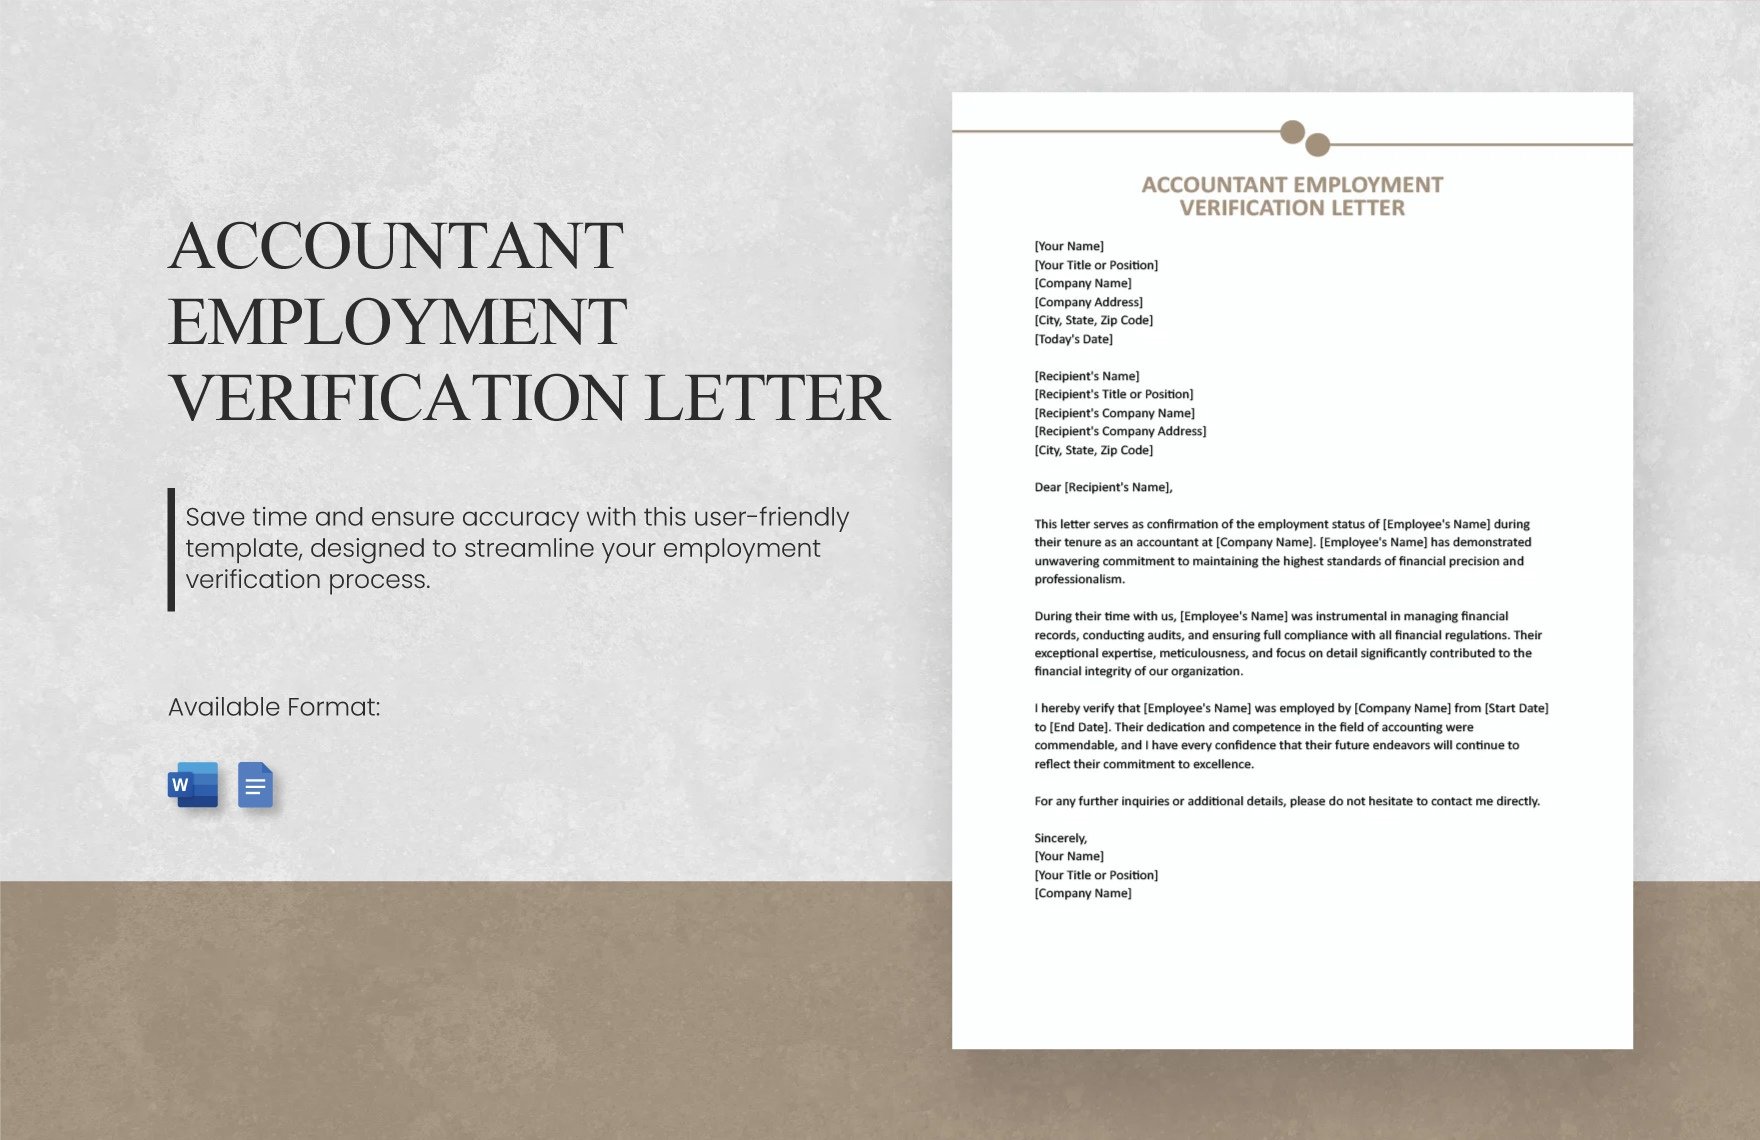 Free Accountant Employment Verification Letter in Word, Google Docs